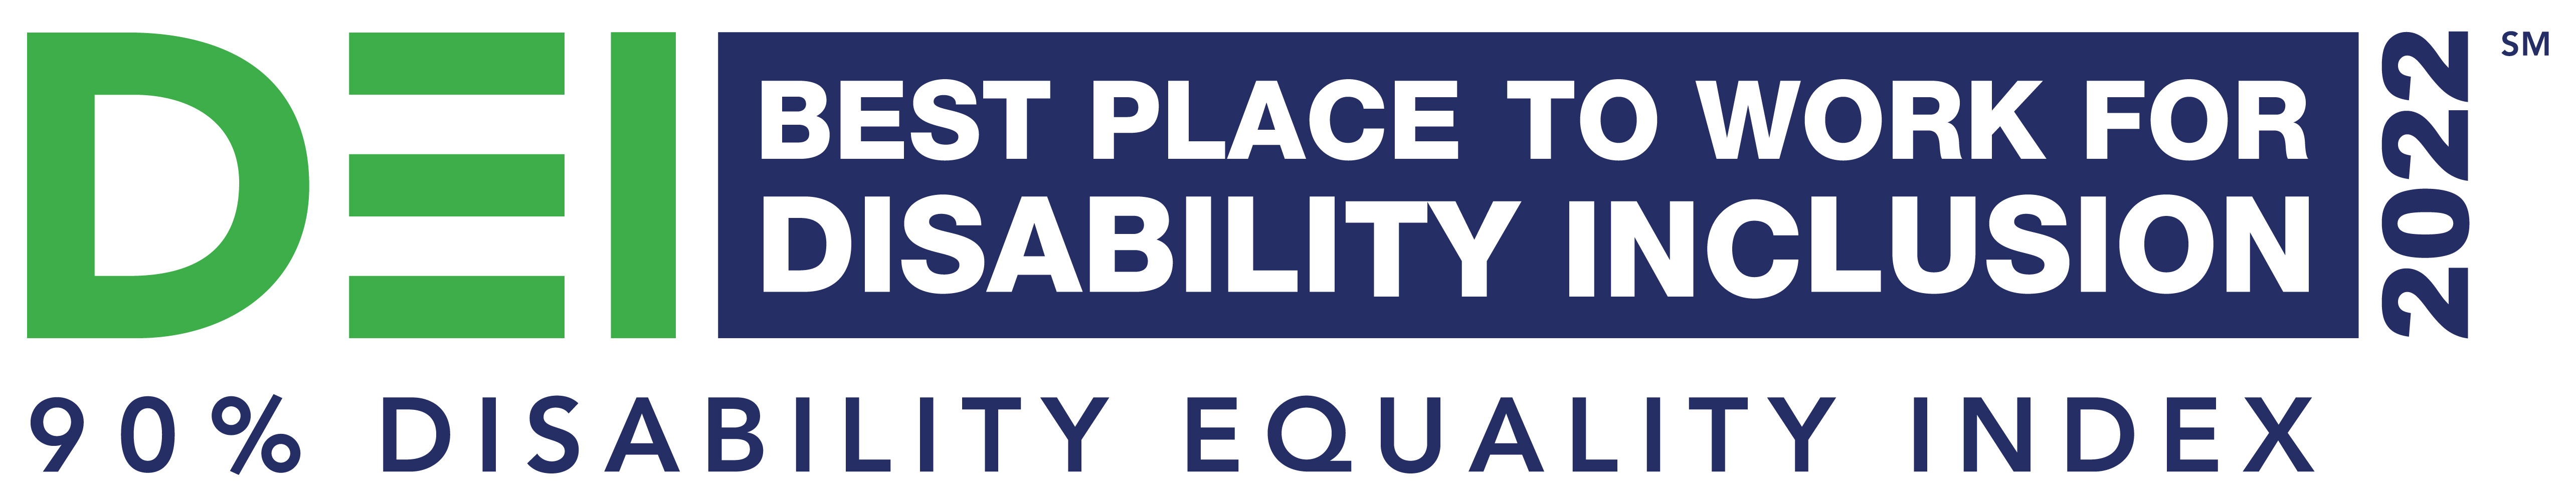 BEST PLACE TO WORK FOR DISABILITY INCLUSION